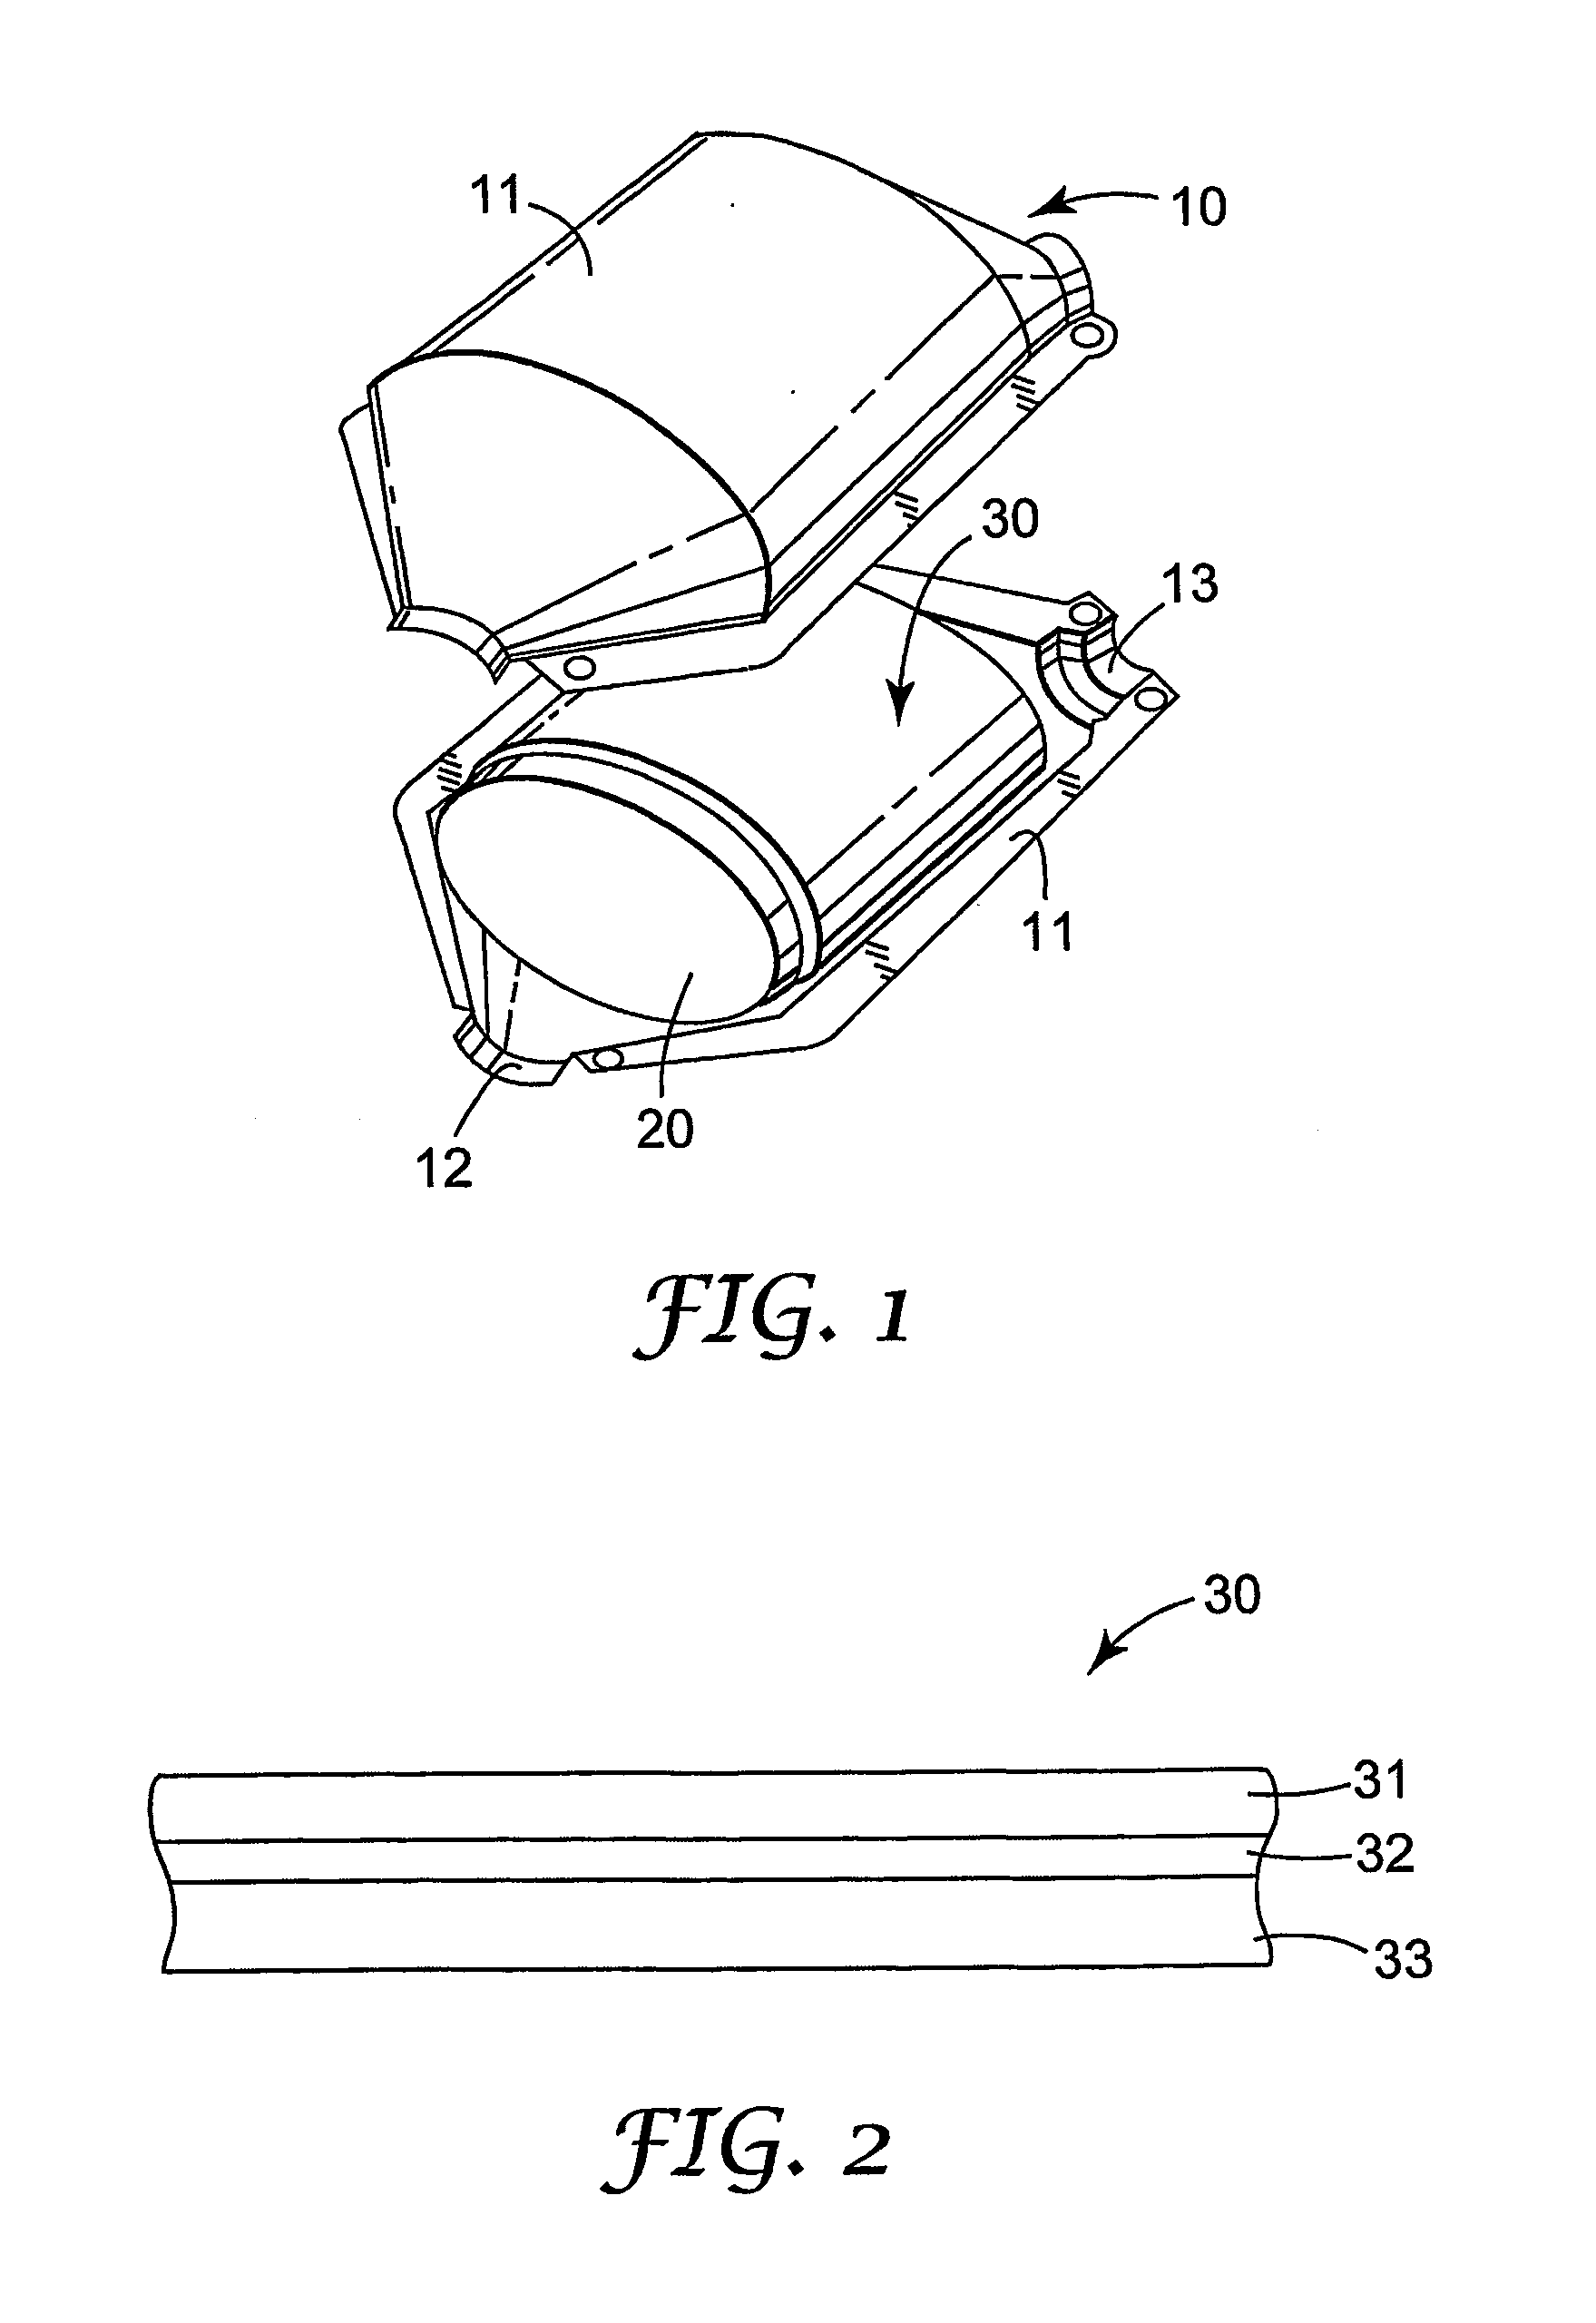 Mounting mat for mounting monolith in a polution control device